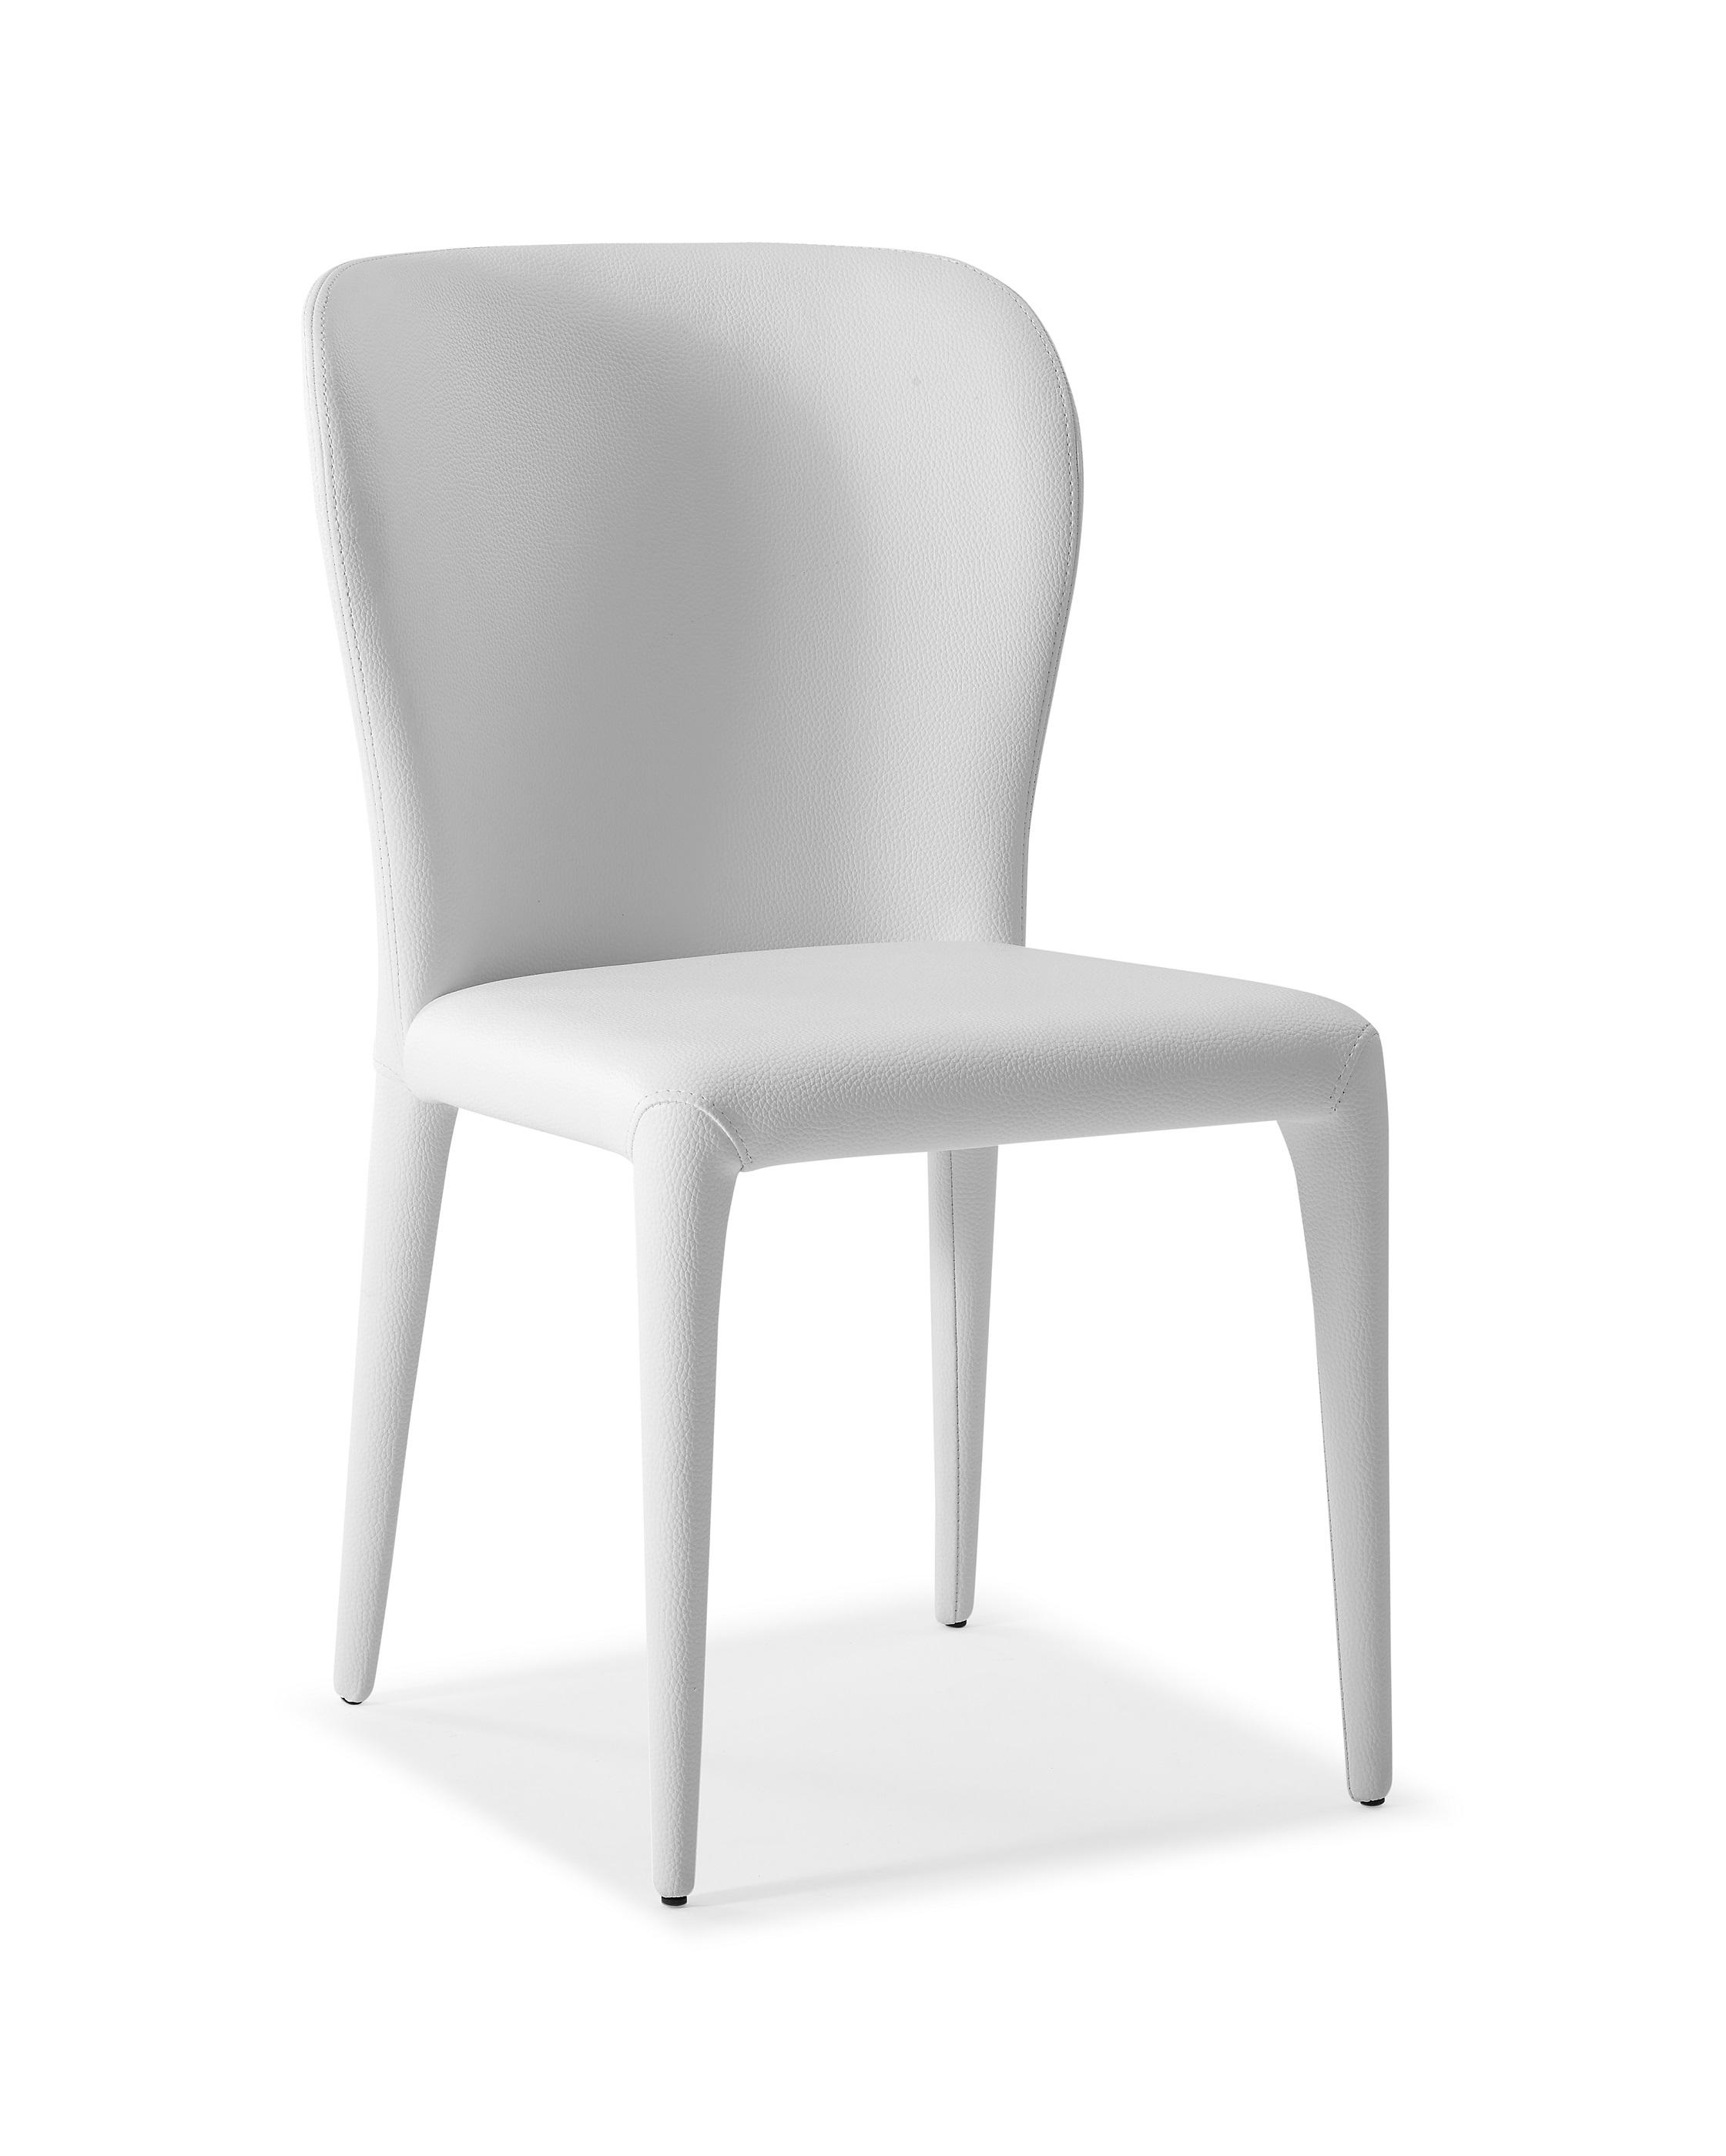 Modern Dining Chair Set DC1455-WHT Hazel DC1455-WHT in White Faux Leather